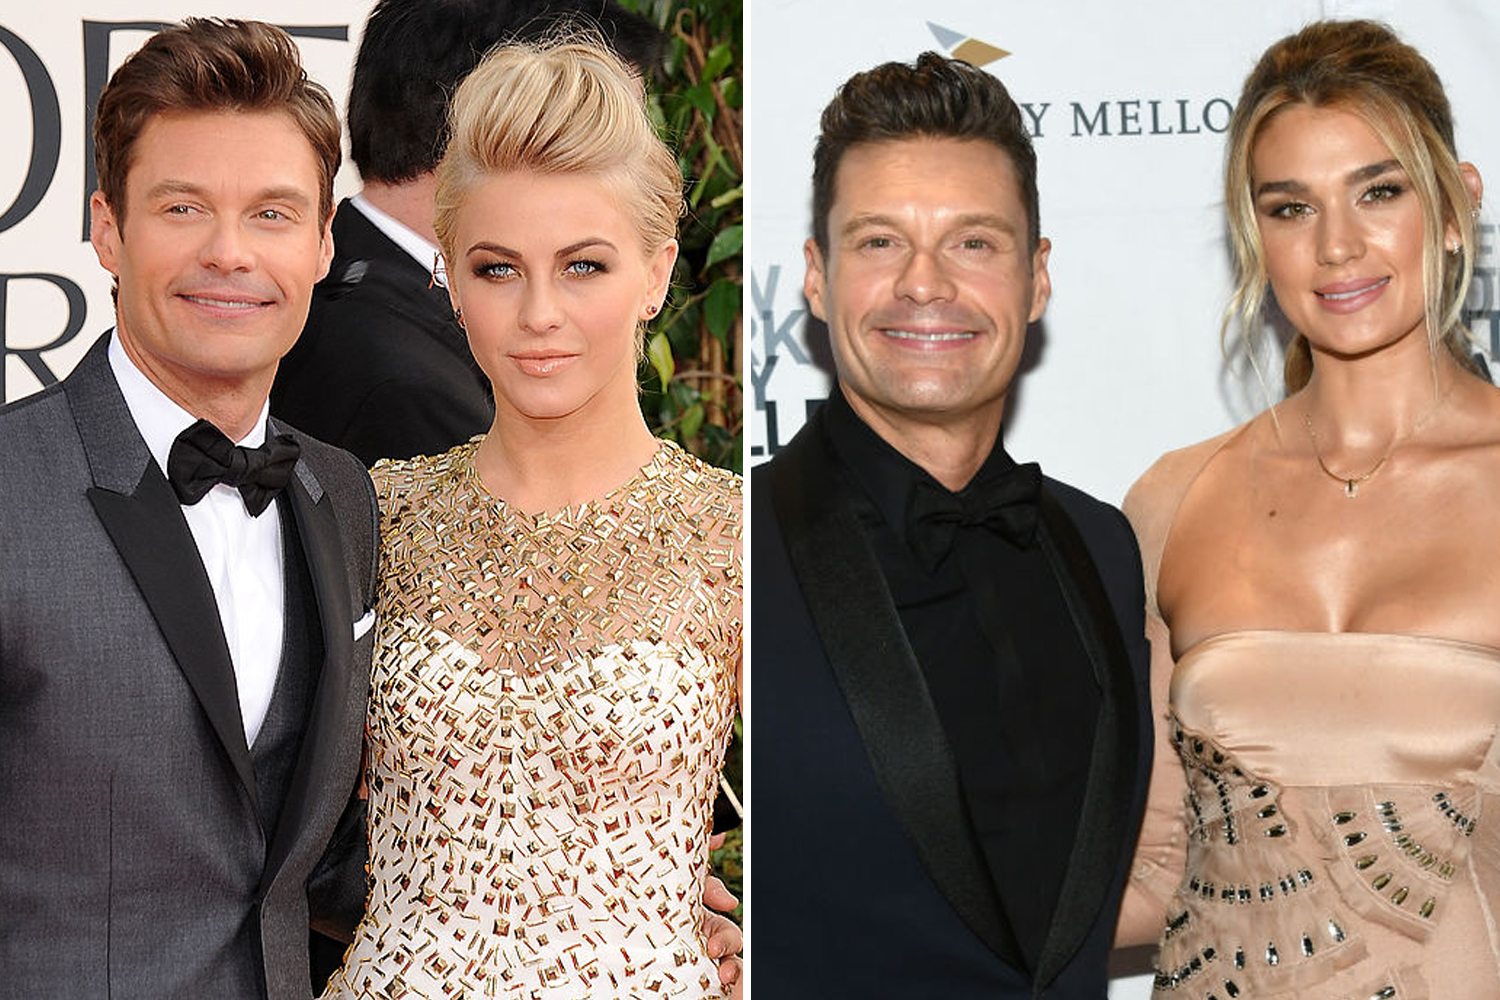  Previously, Ryan Seacrest dated Juliane Hough (Left) and Shayna Taylor (Right)